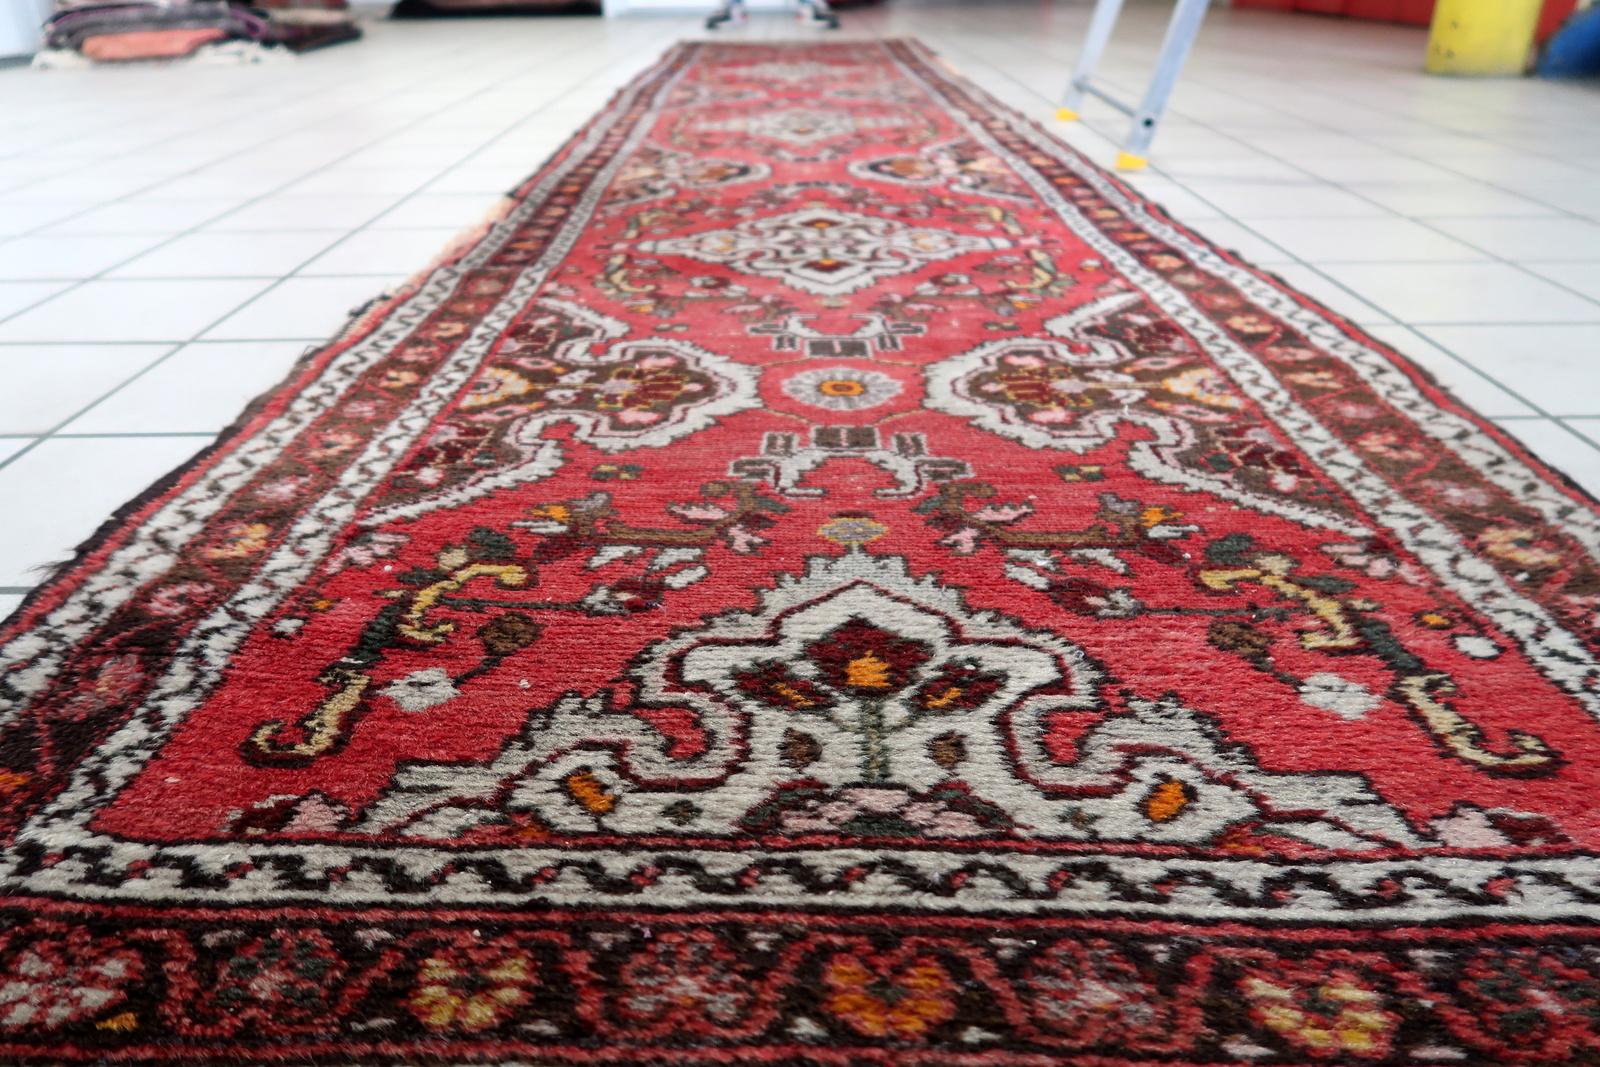 Handmade Antique Persian Malayer Runner Rug 2.5' x 12.5', 1920s - 1C1143 For Sale 8